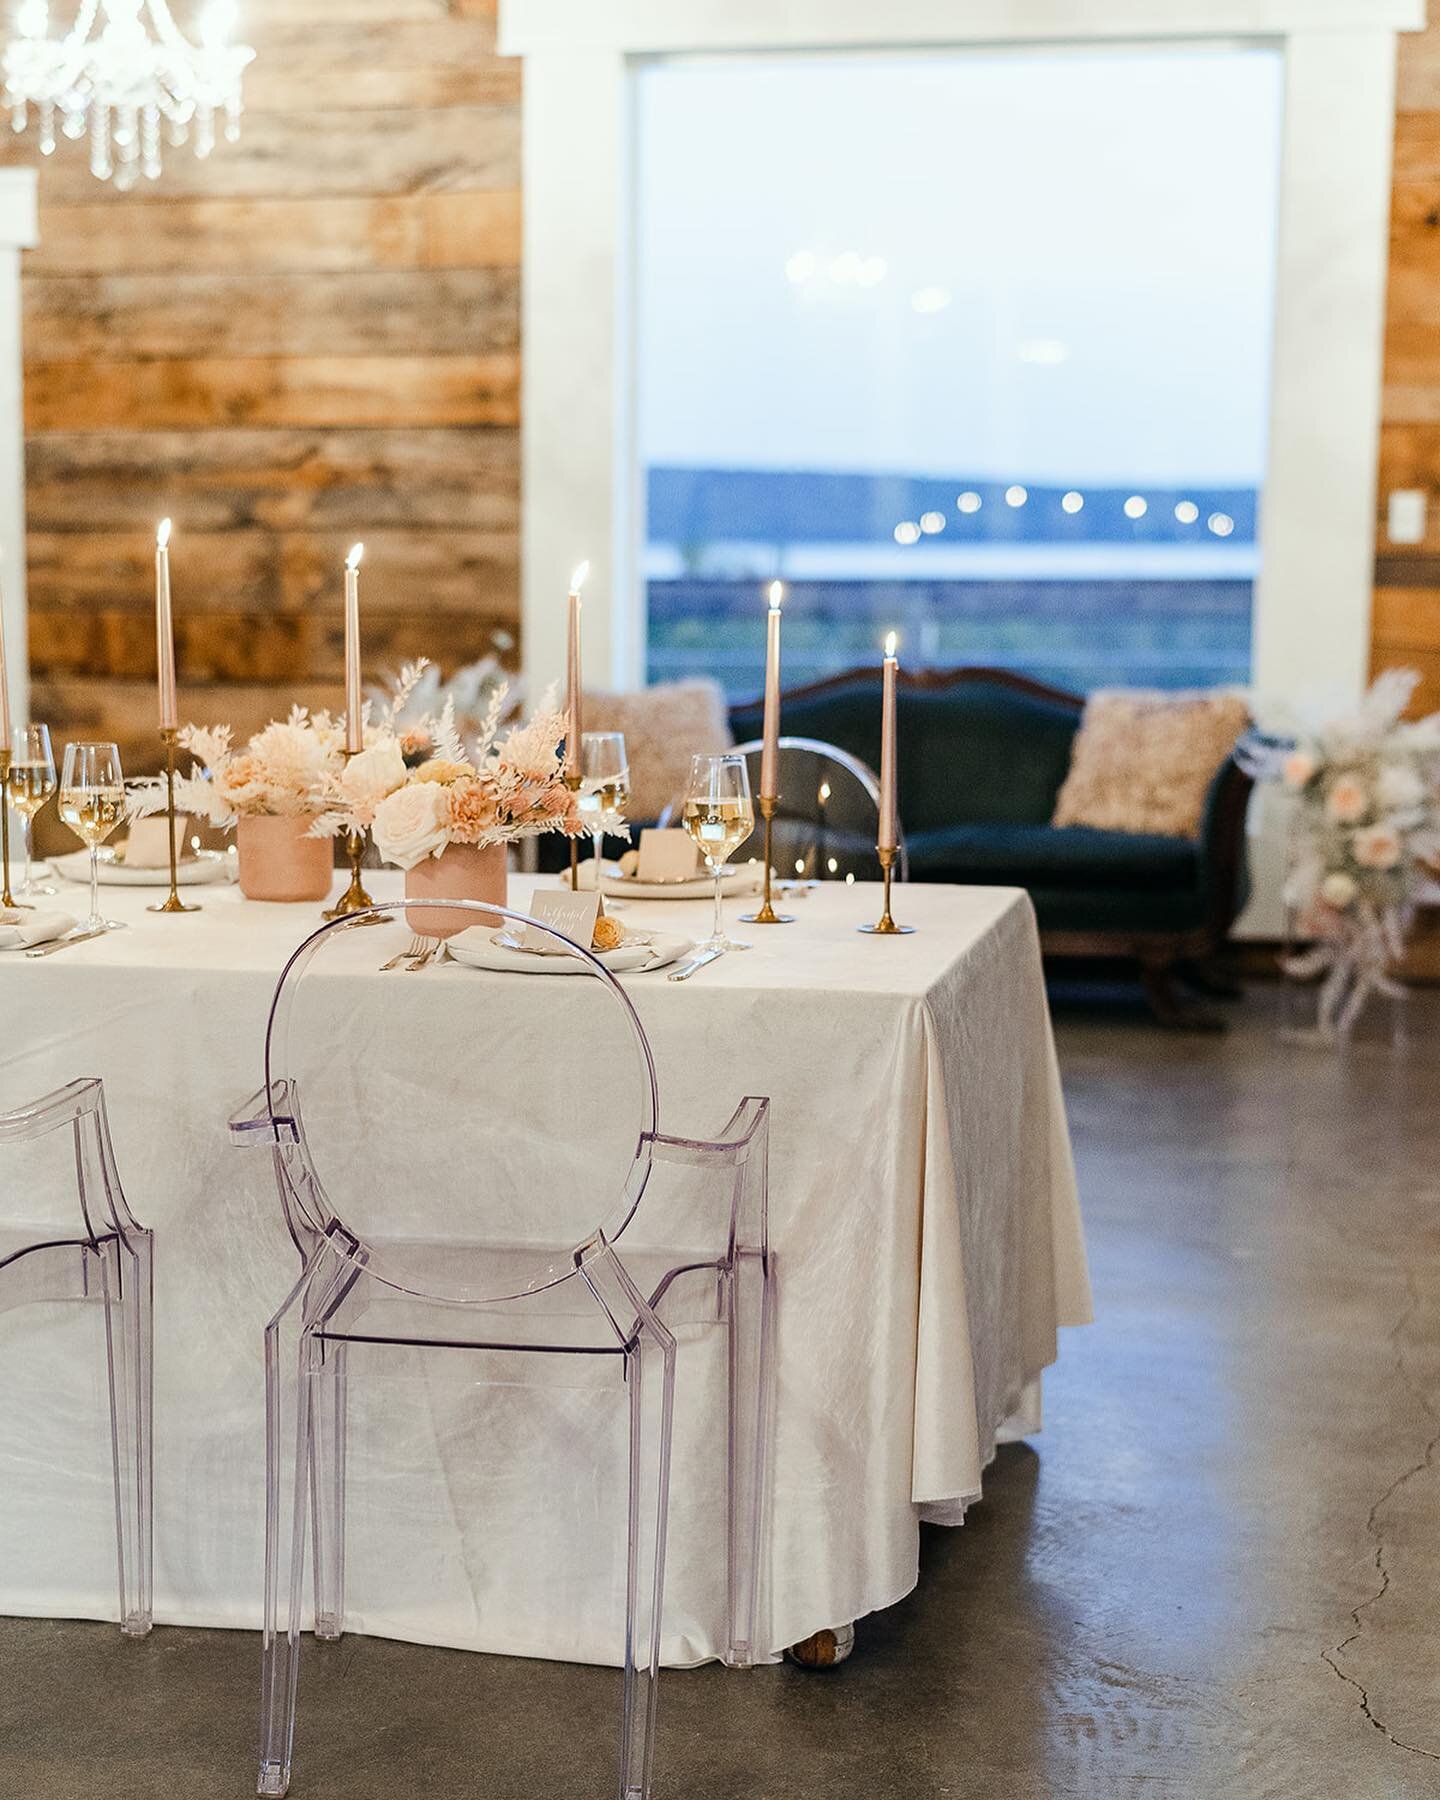 Acrylic chairs FOR THE WIN. 😍 Coupled with an ivory velvet linen, @bluechalkeventsllc and @dvandco knocked this styling out of the park!

Venue - @thepointelakeeufaula 
Photographer - @dvandco
Planning/Coordinating - @bluechalkeventsllc 
Floral - @t